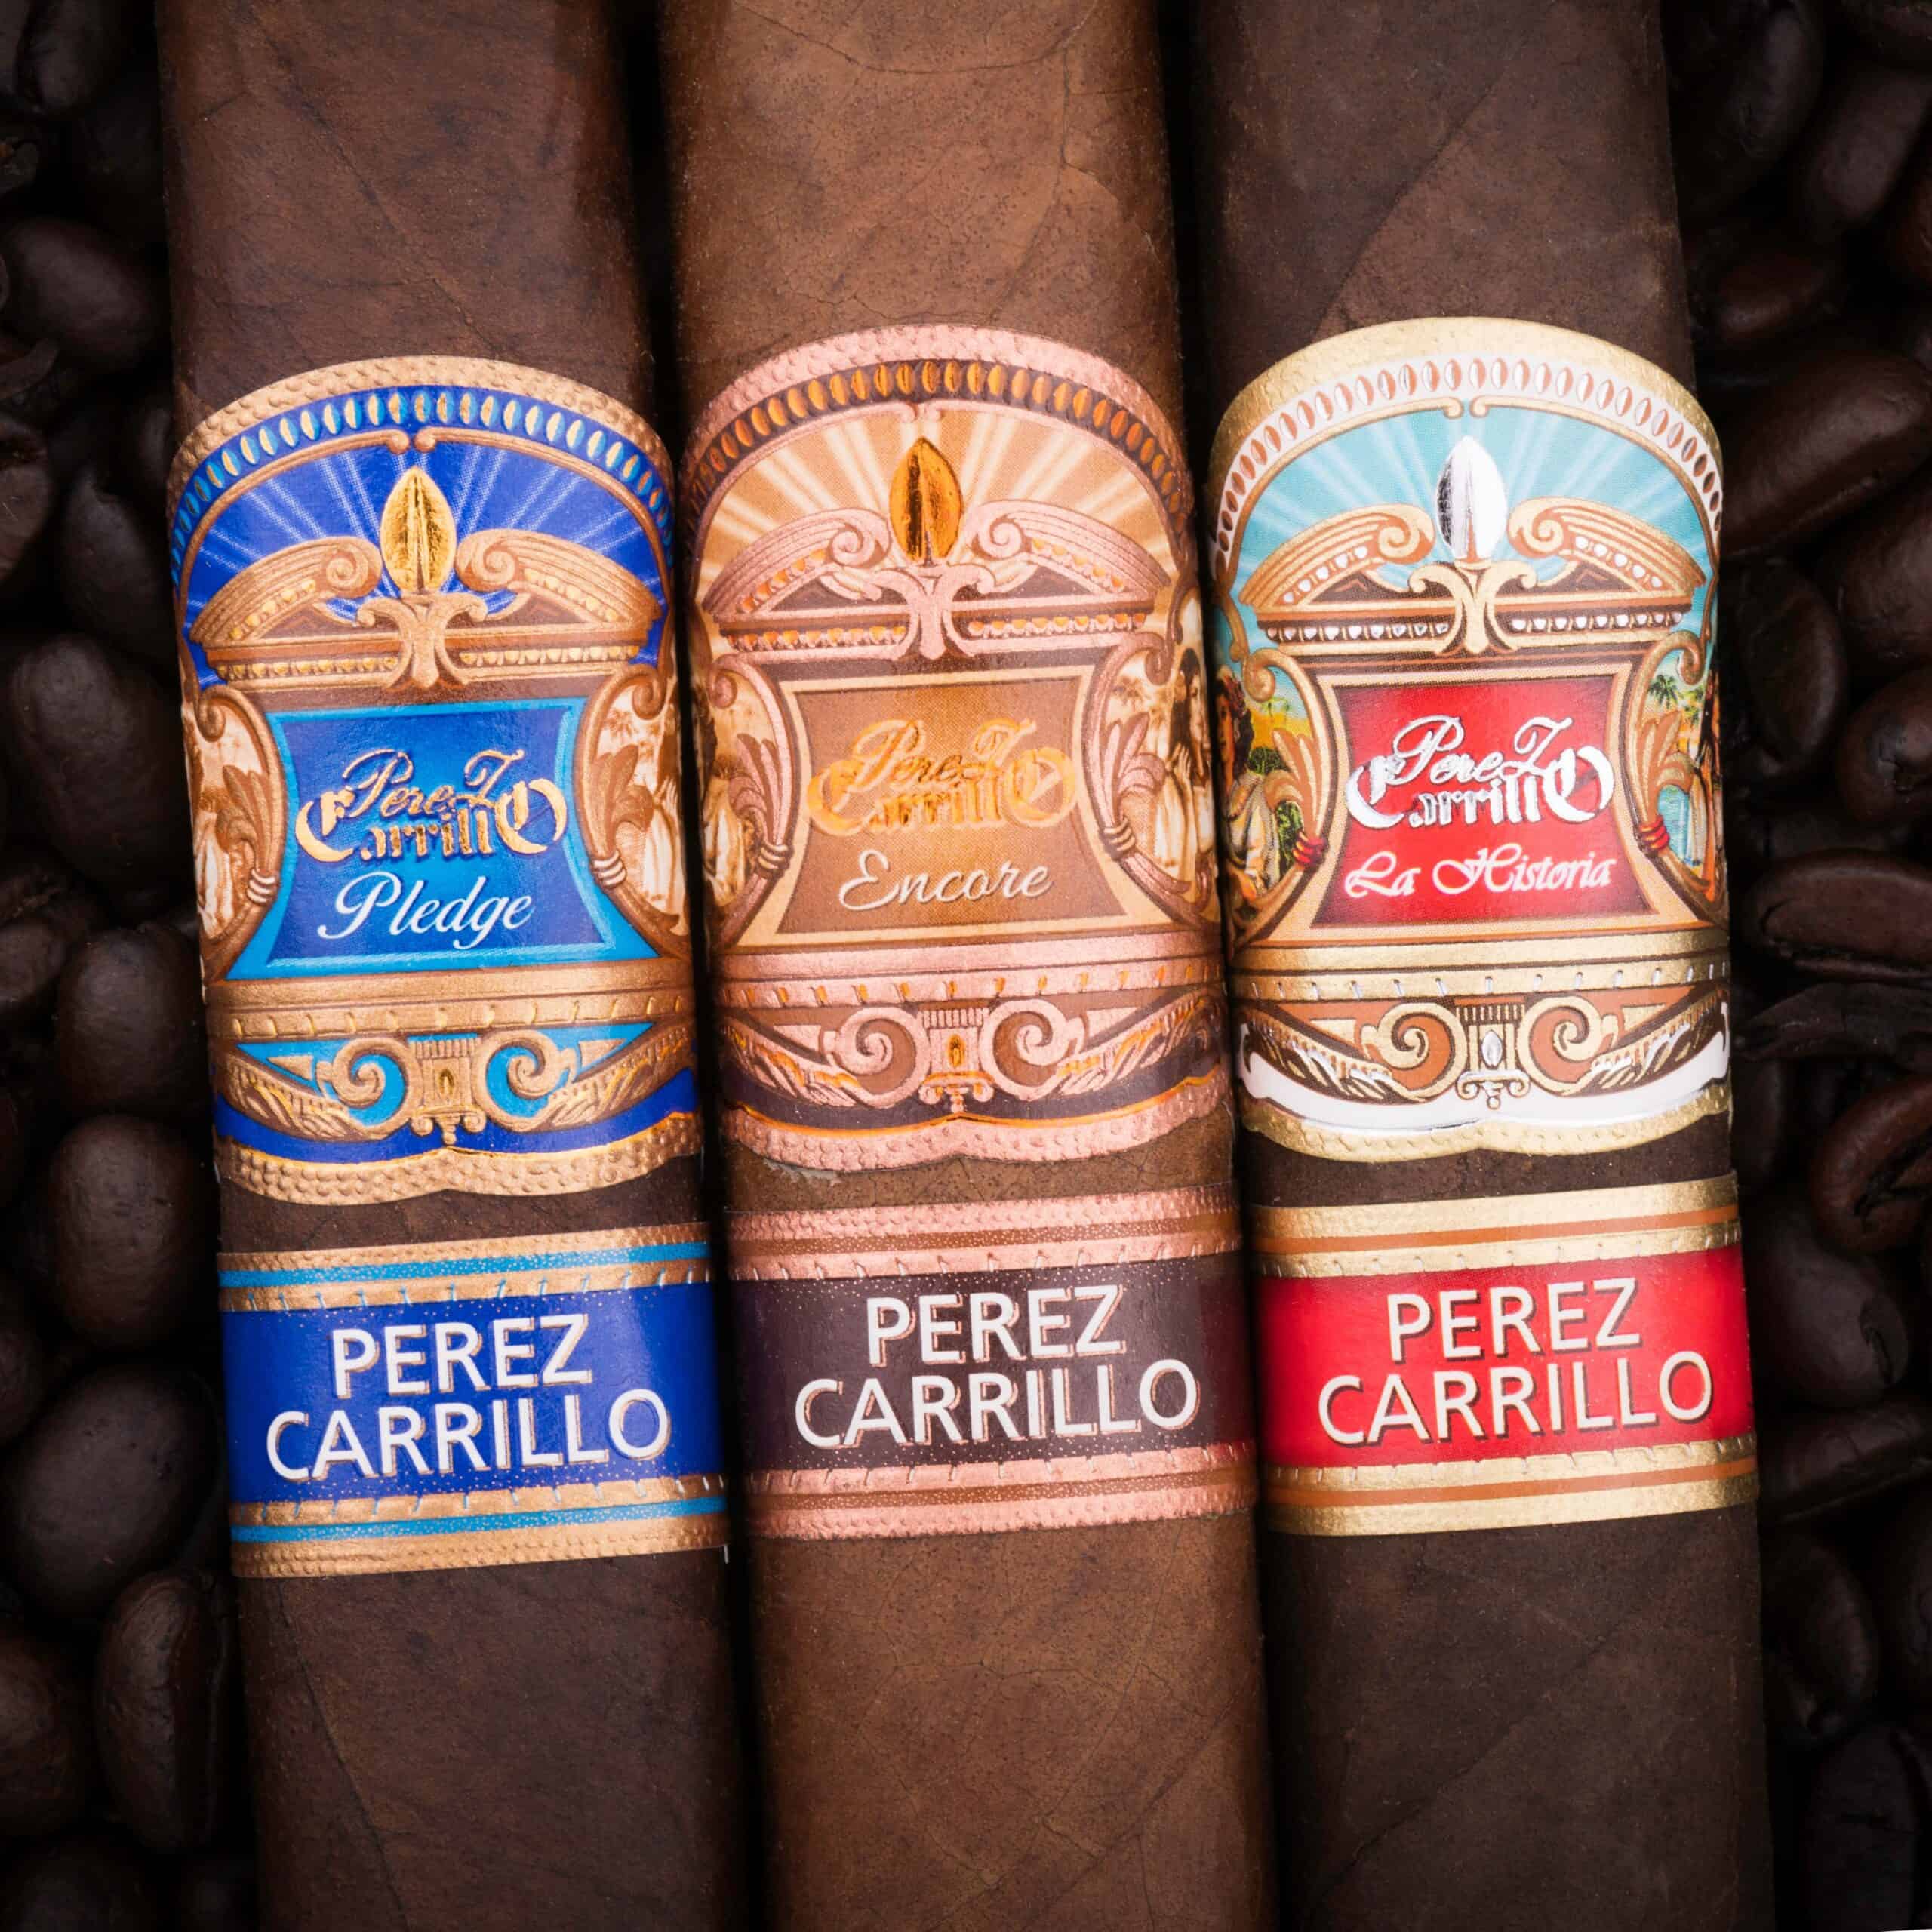 Who Says Three is a Crowd? Perez-Carrillo Trilogy Explained